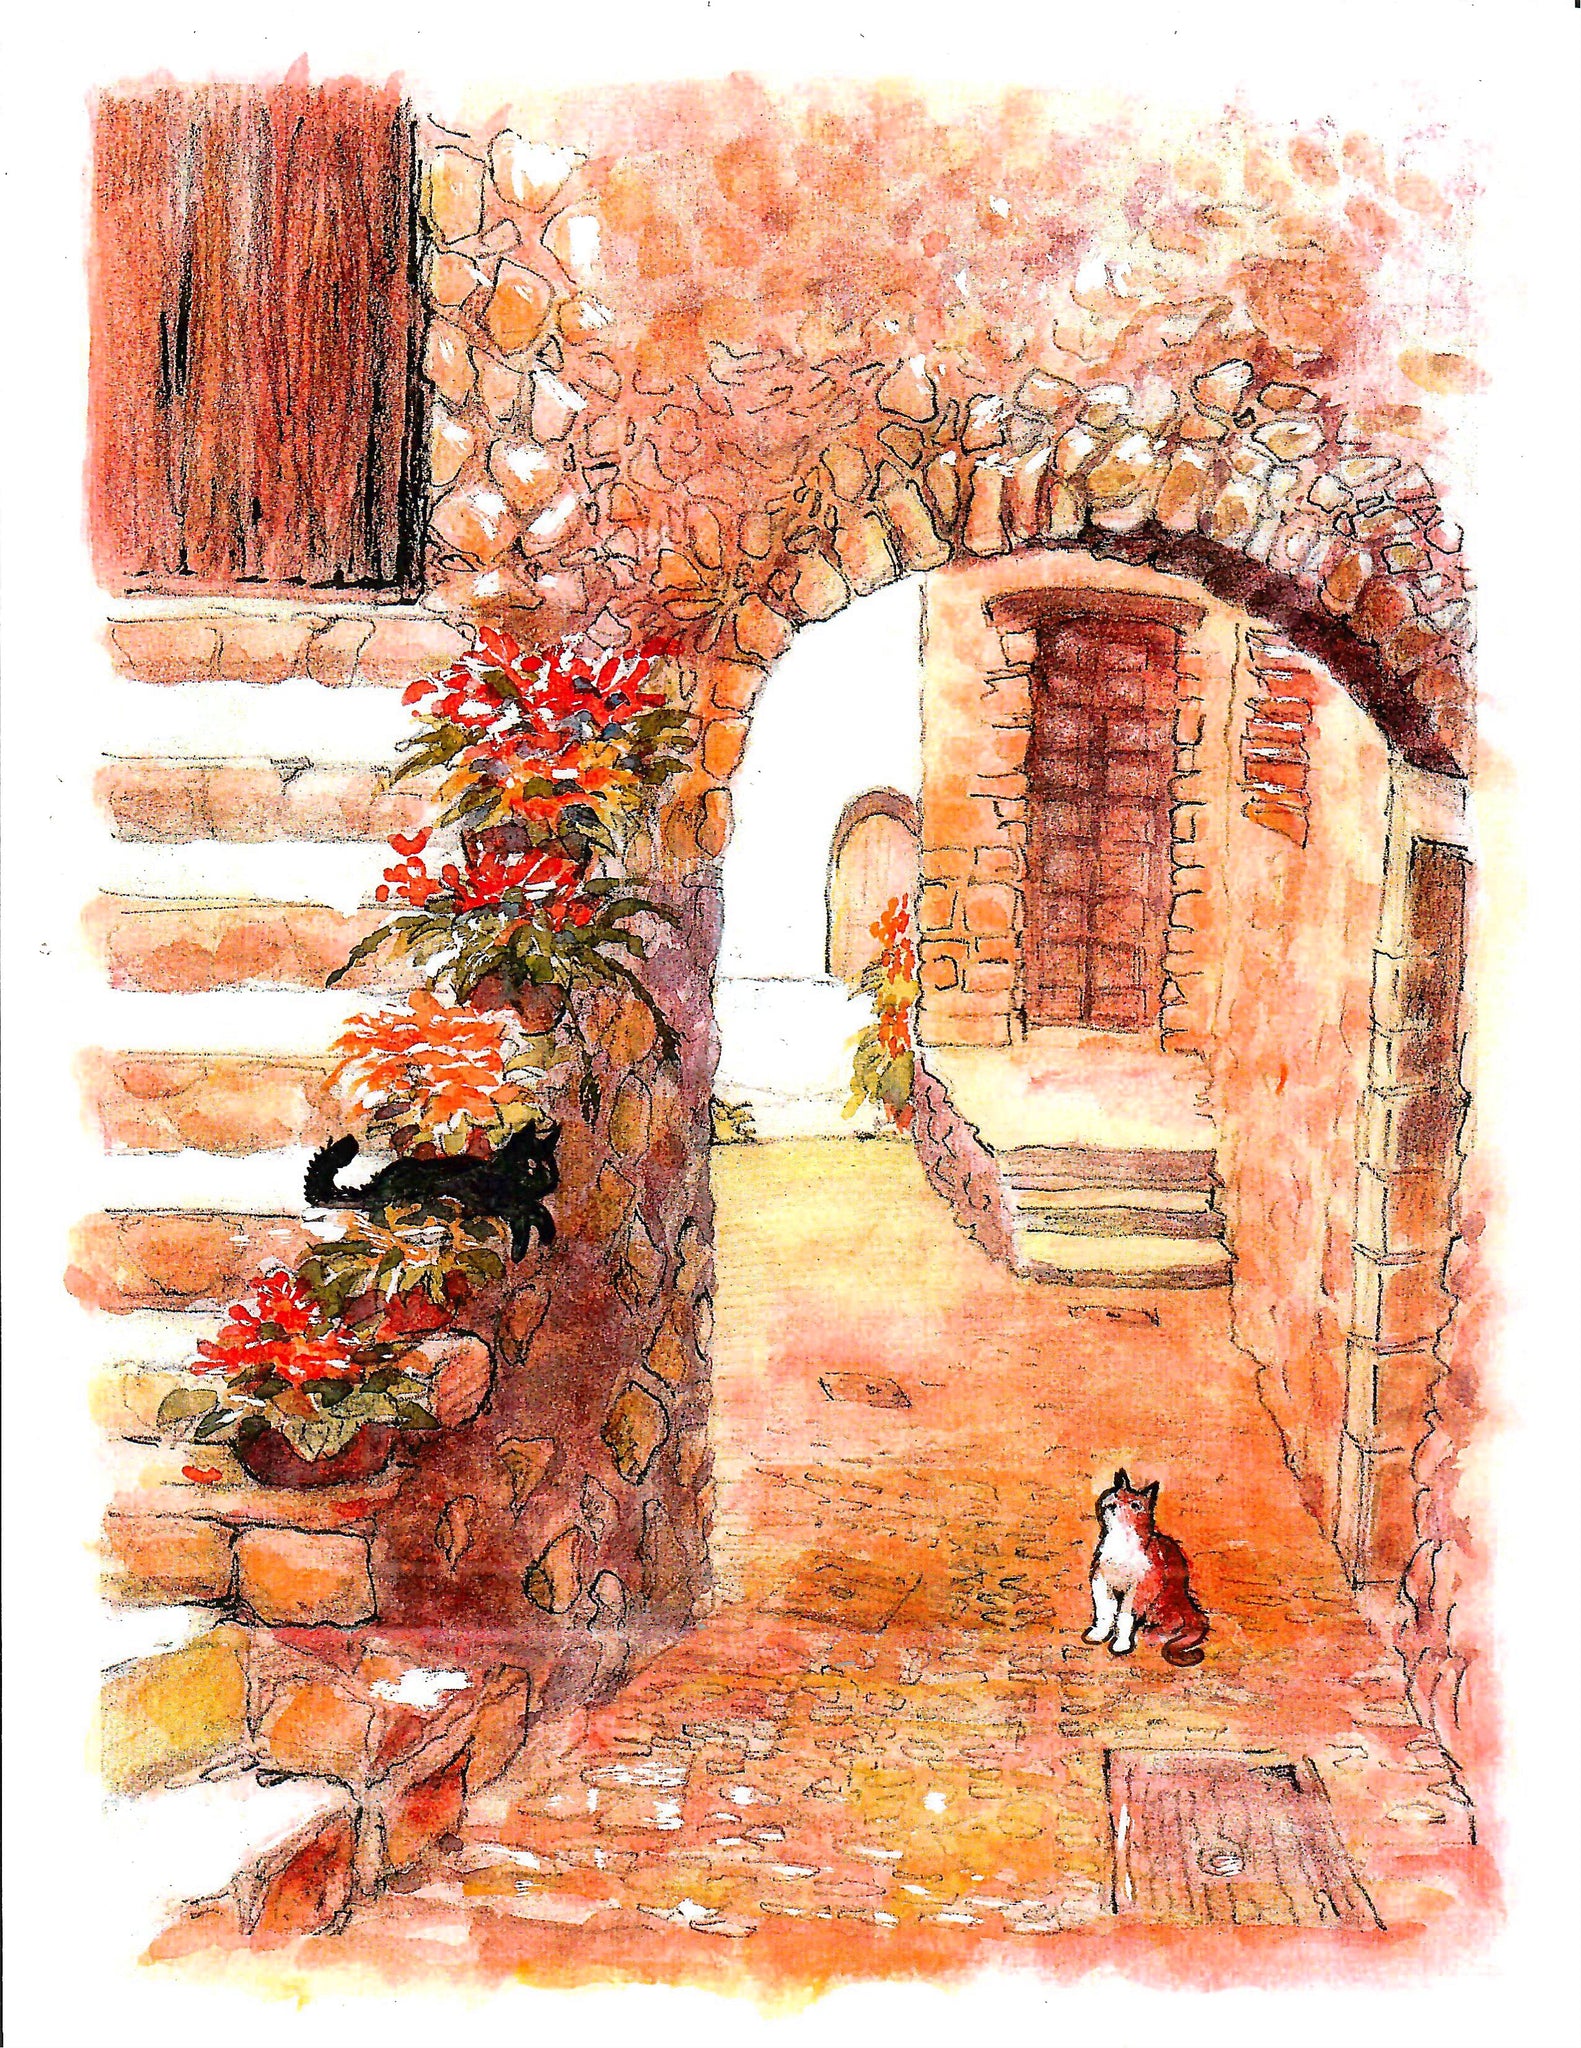 Cats Relaxing Under Stone Archway Near Flower Pots In Their Paved Alley